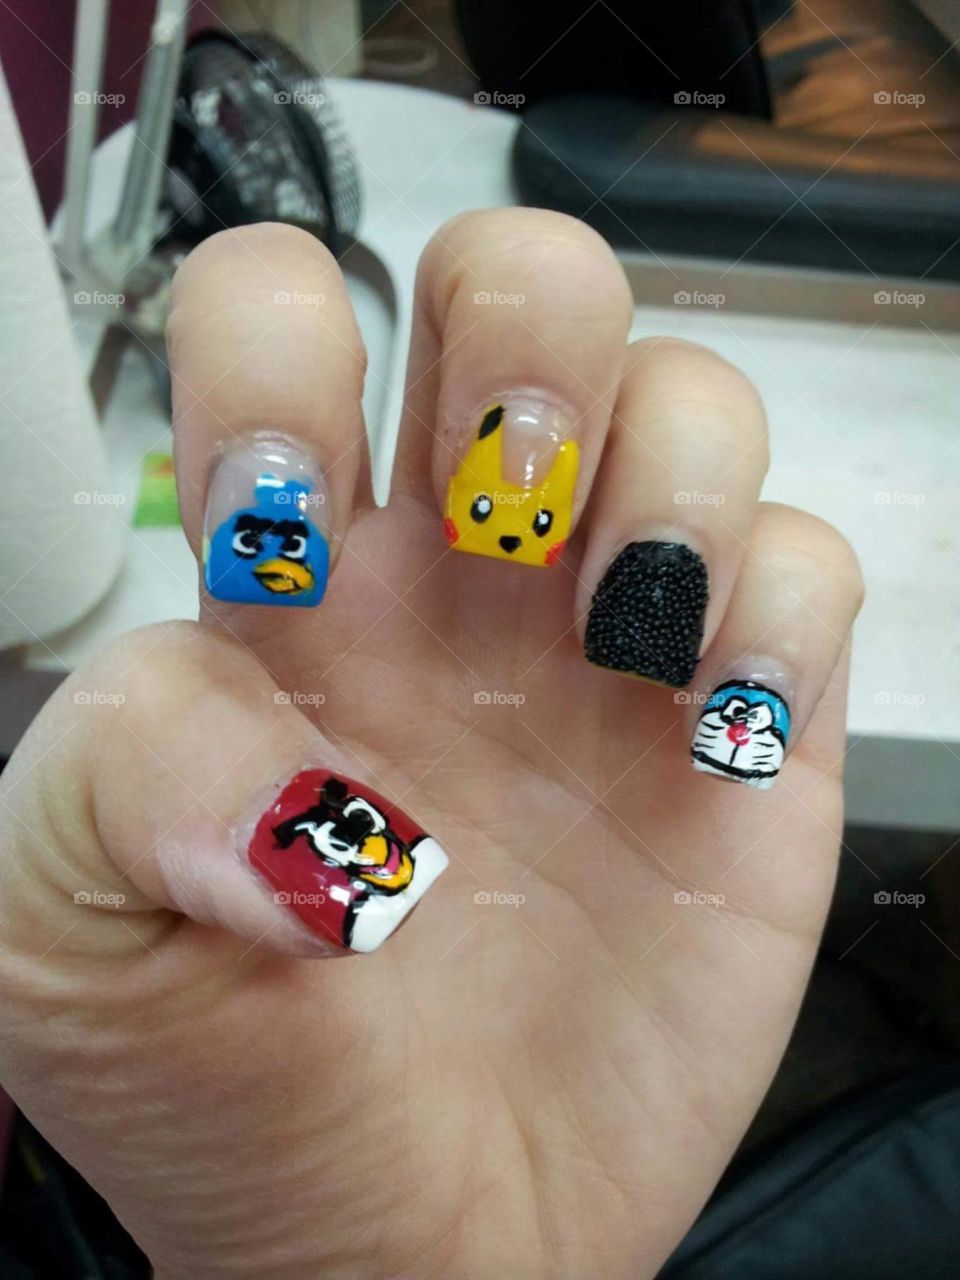 Cartoon characters on the nails